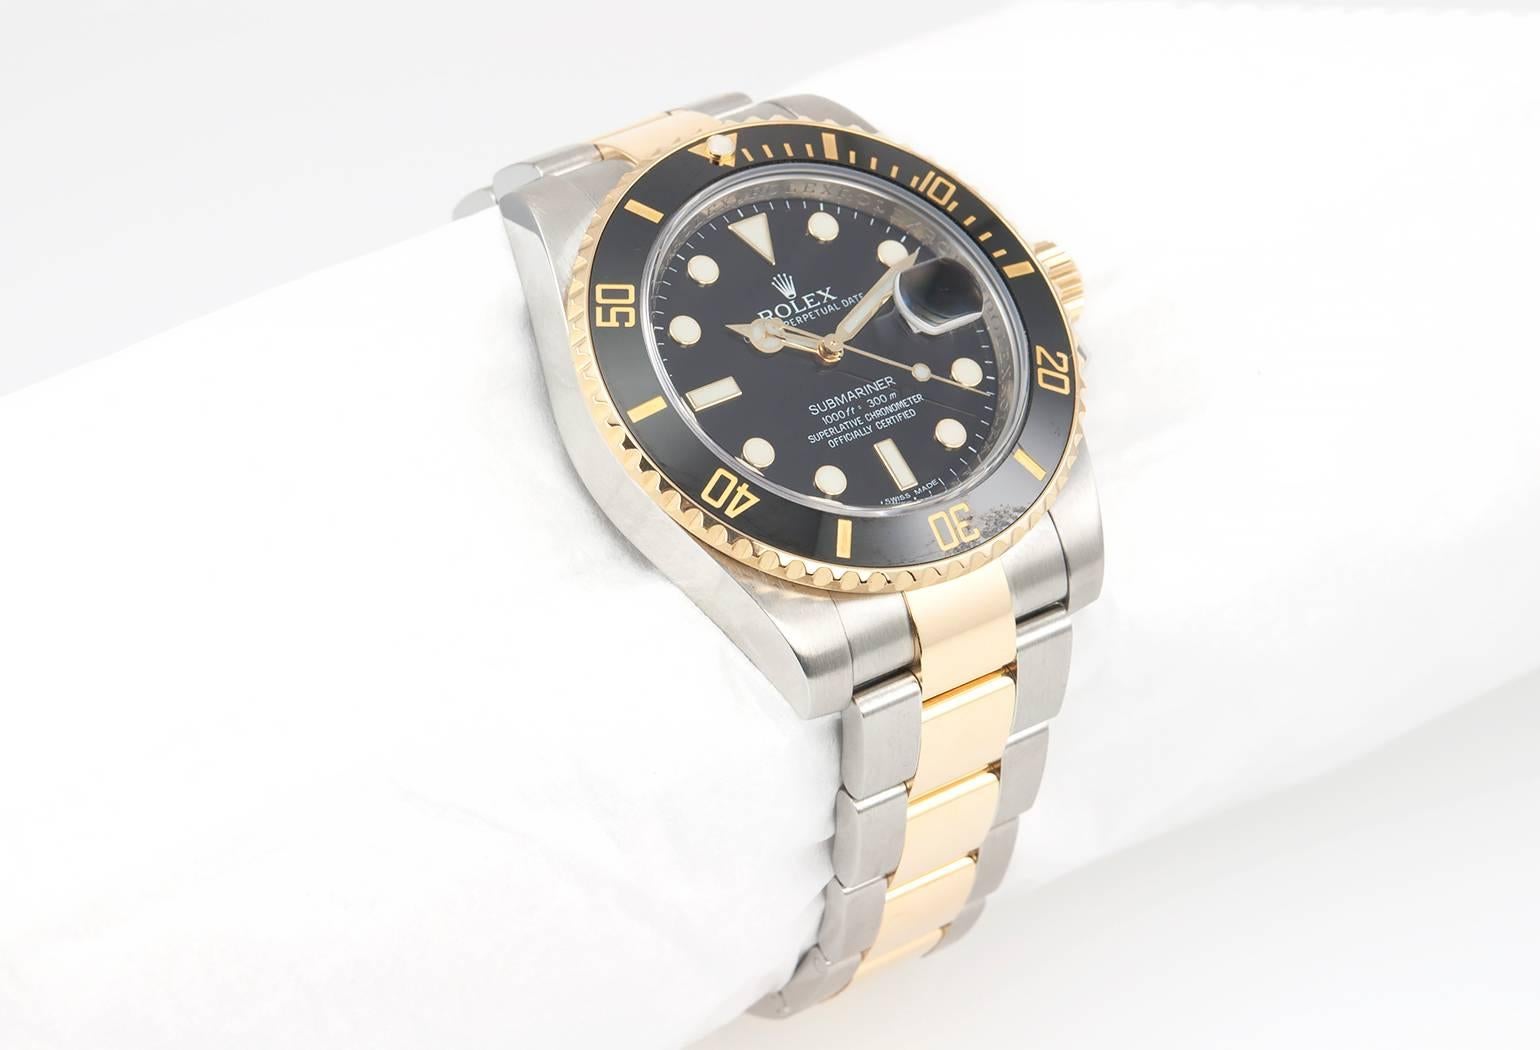 Rolex Yellow Gold Stainless Steel Submariner Wristwatch Ref 116613 In Excellent Condition For Sale In Los Angeles, CA